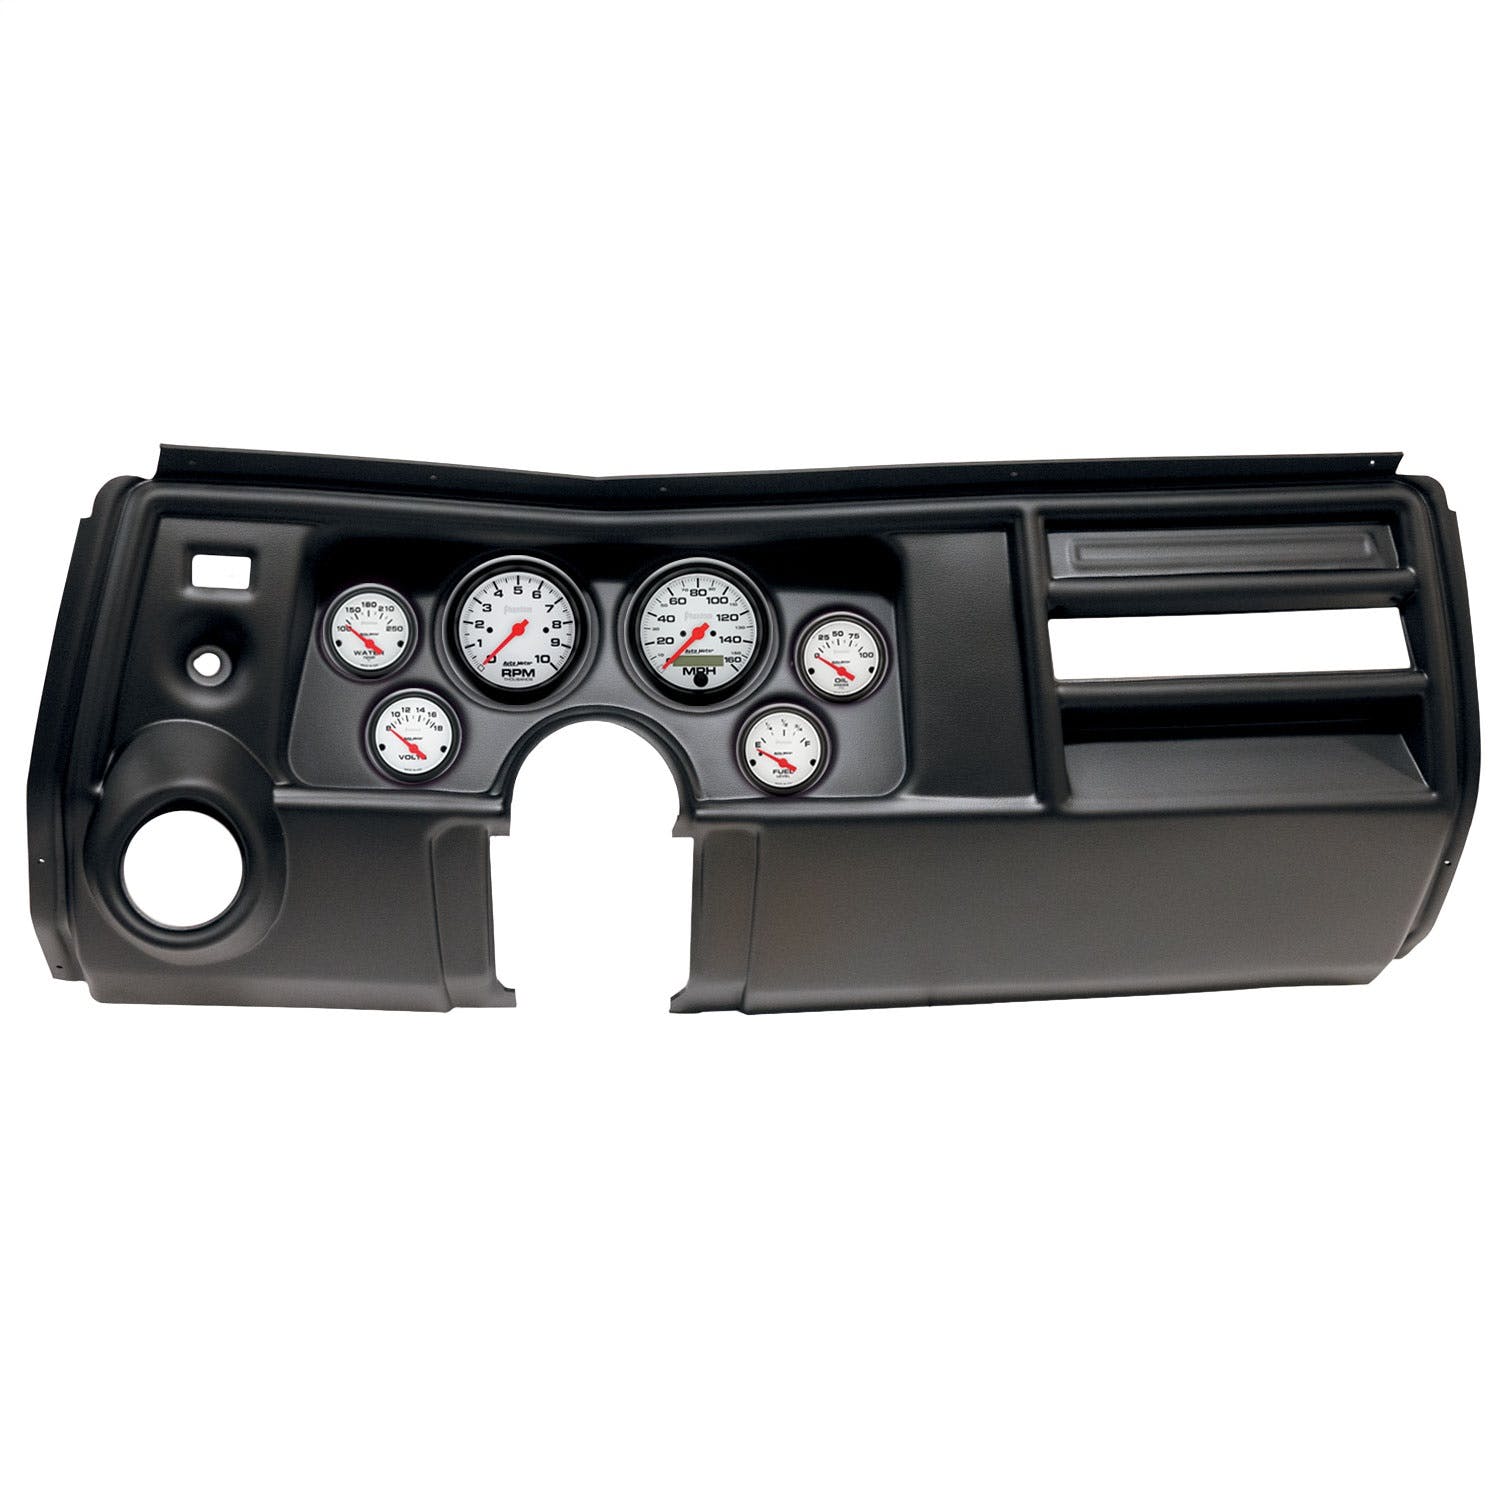 AutoMeter Products 2909-09 6 Gauge Direct-Fit Dash Kit, Chevy Chevelle Vent 69, Phantom